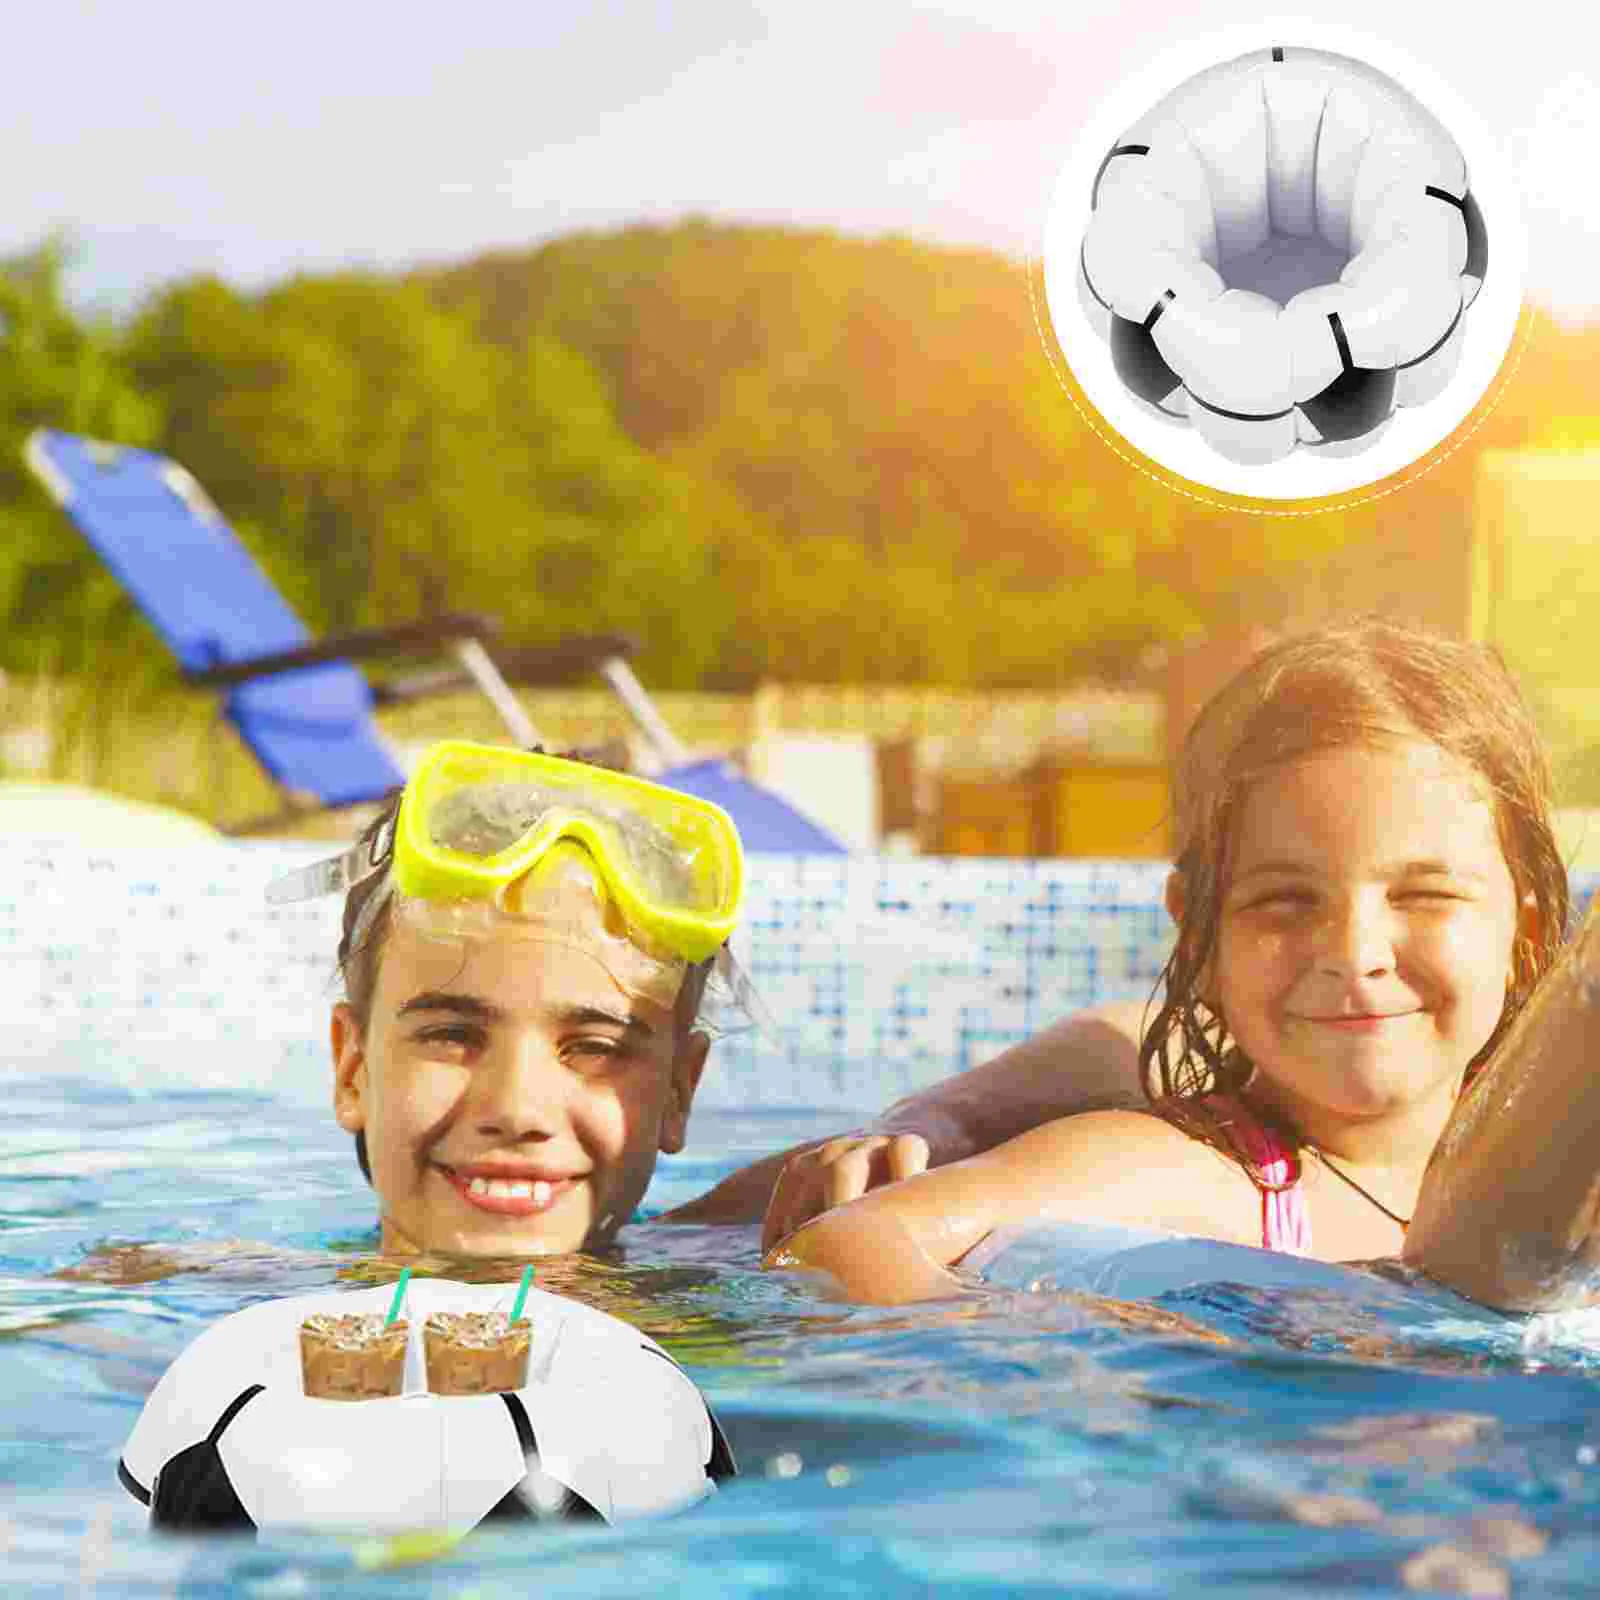 

Bucket Ice Inflatable Pool Holder Coolerdrink Tray Floating Buffet Drinks Tub Party Serving For Food Chiller Champagne